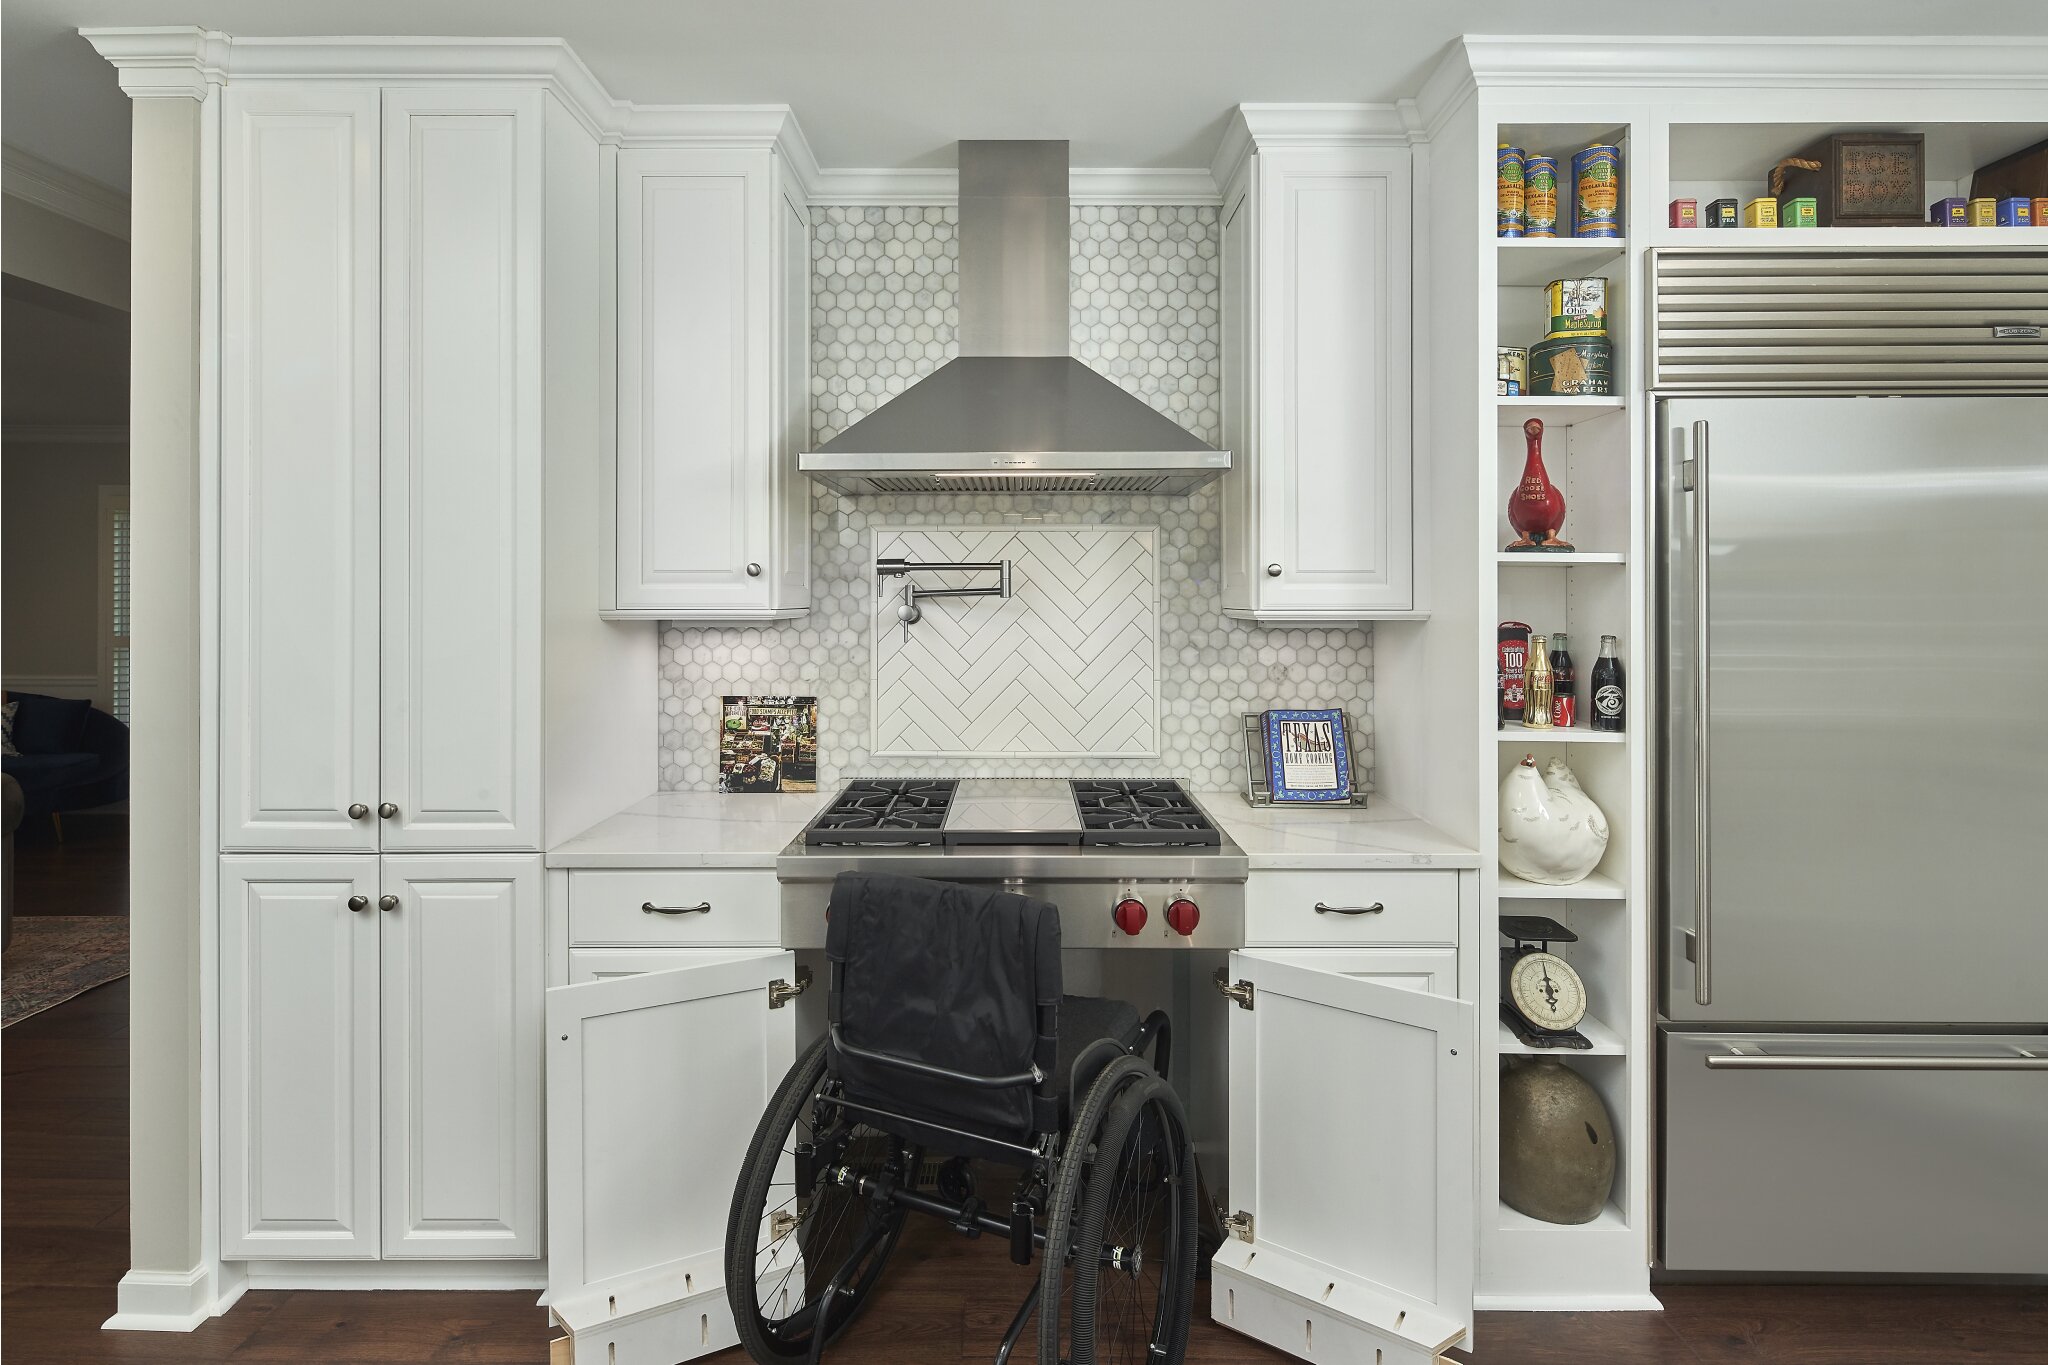 Handicap accessible universally designed kitchen with modified stovetop